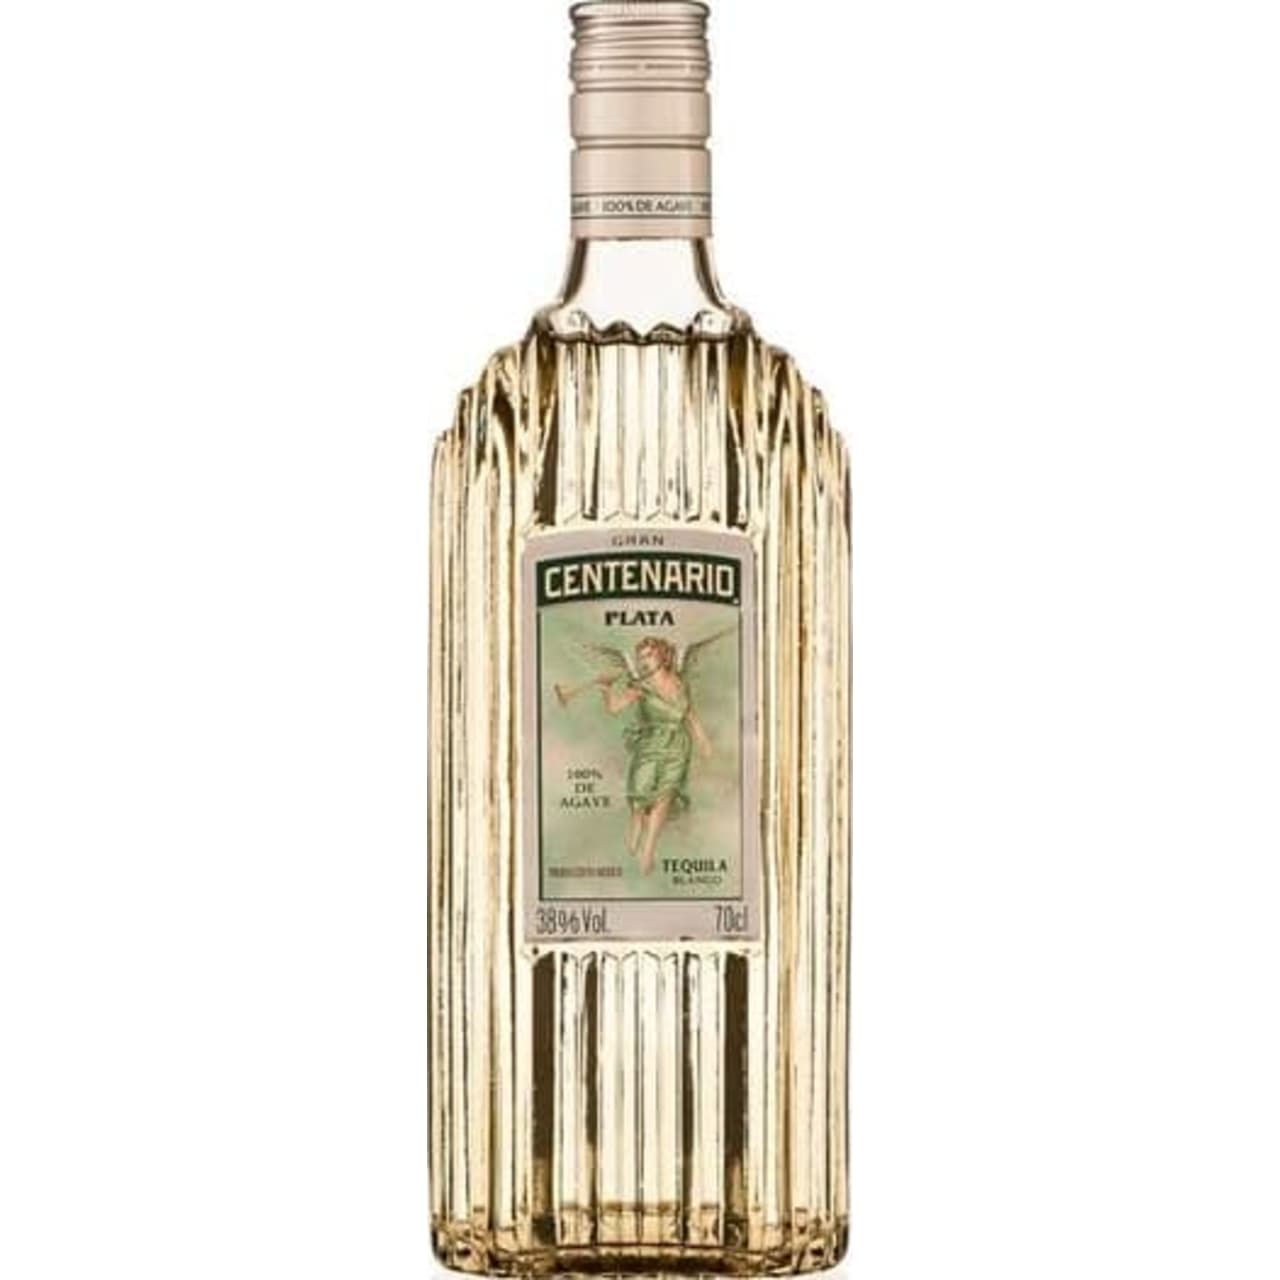 A silver Tequila (100% blue agave) aged between two and six months in oak and then blended with much older Añejo Tequilas, which is finally filtered through fine charcoal.